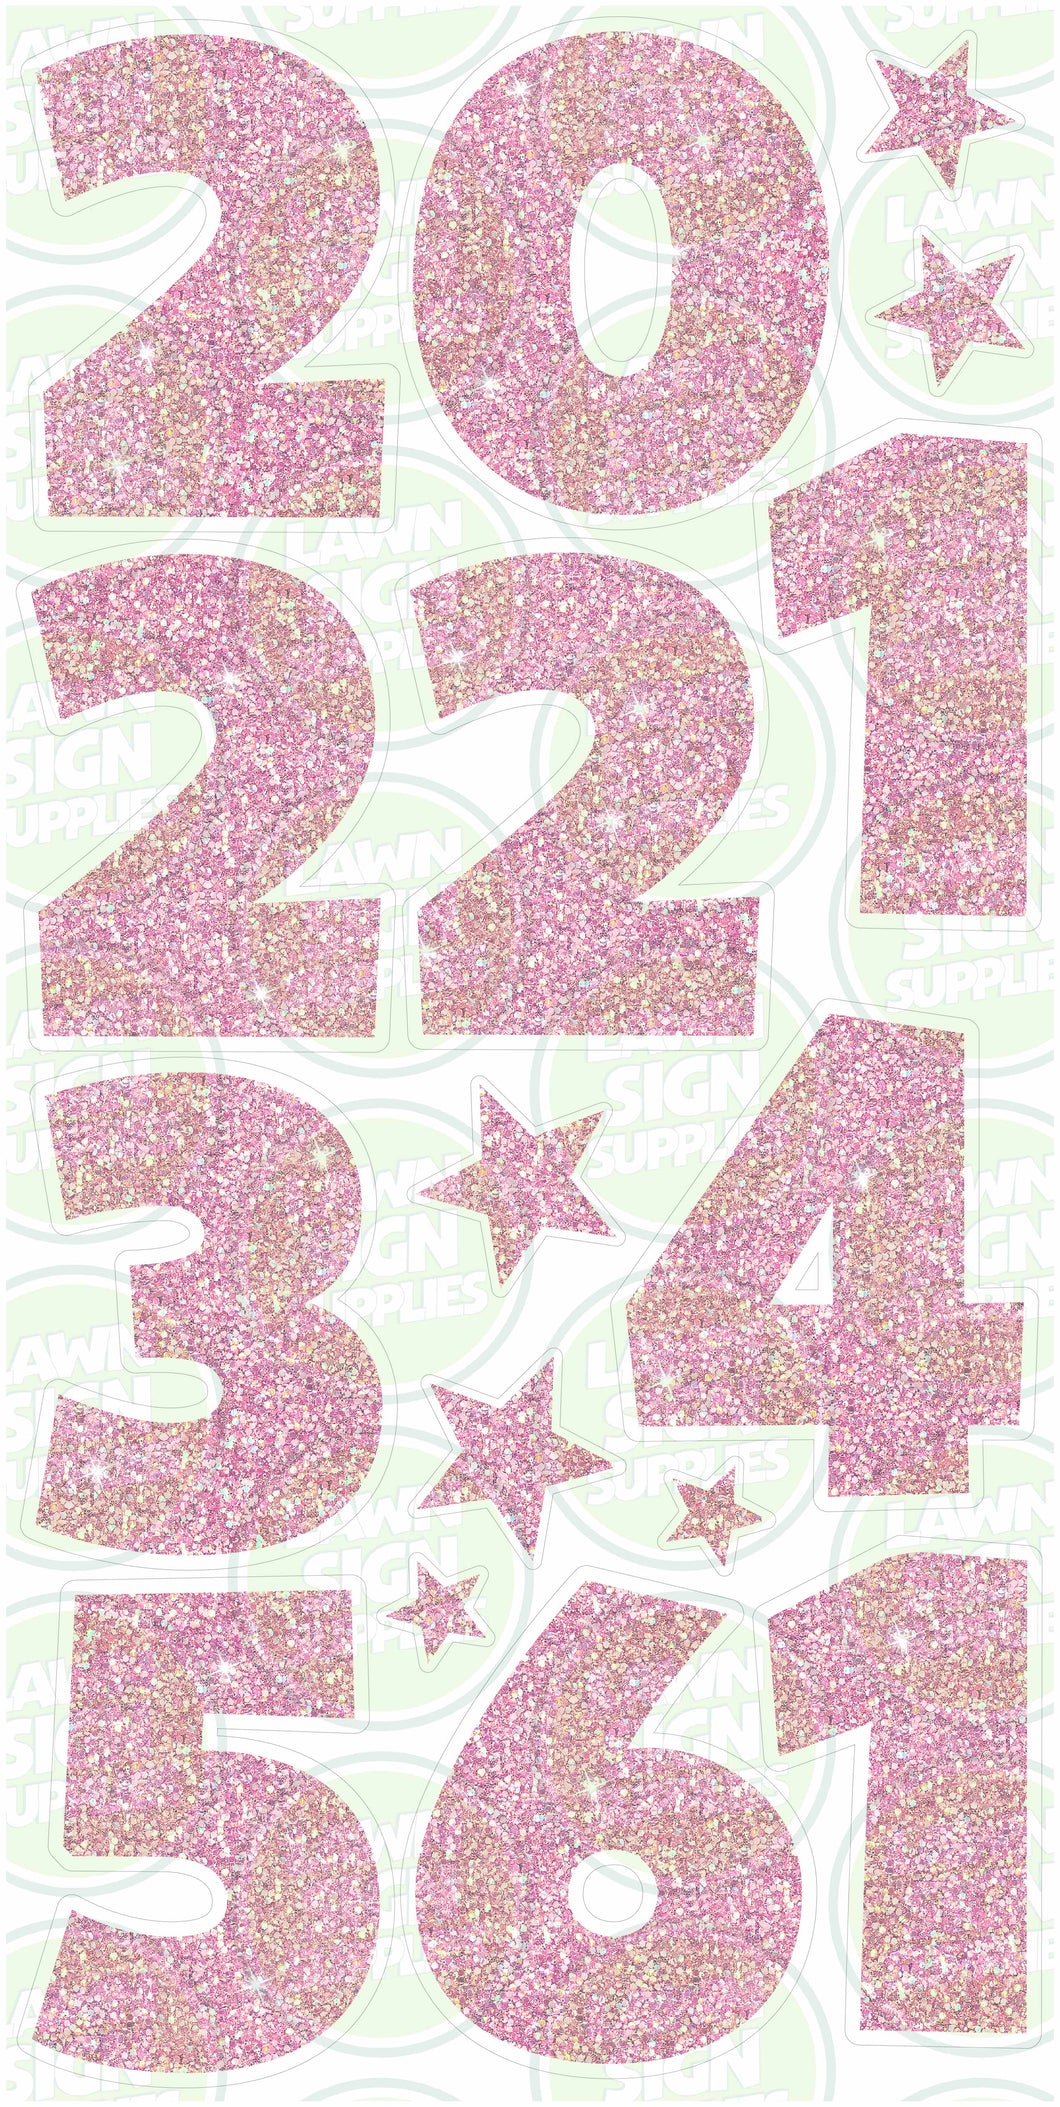 NUMBERS (60CM) - PINK SPARKLE